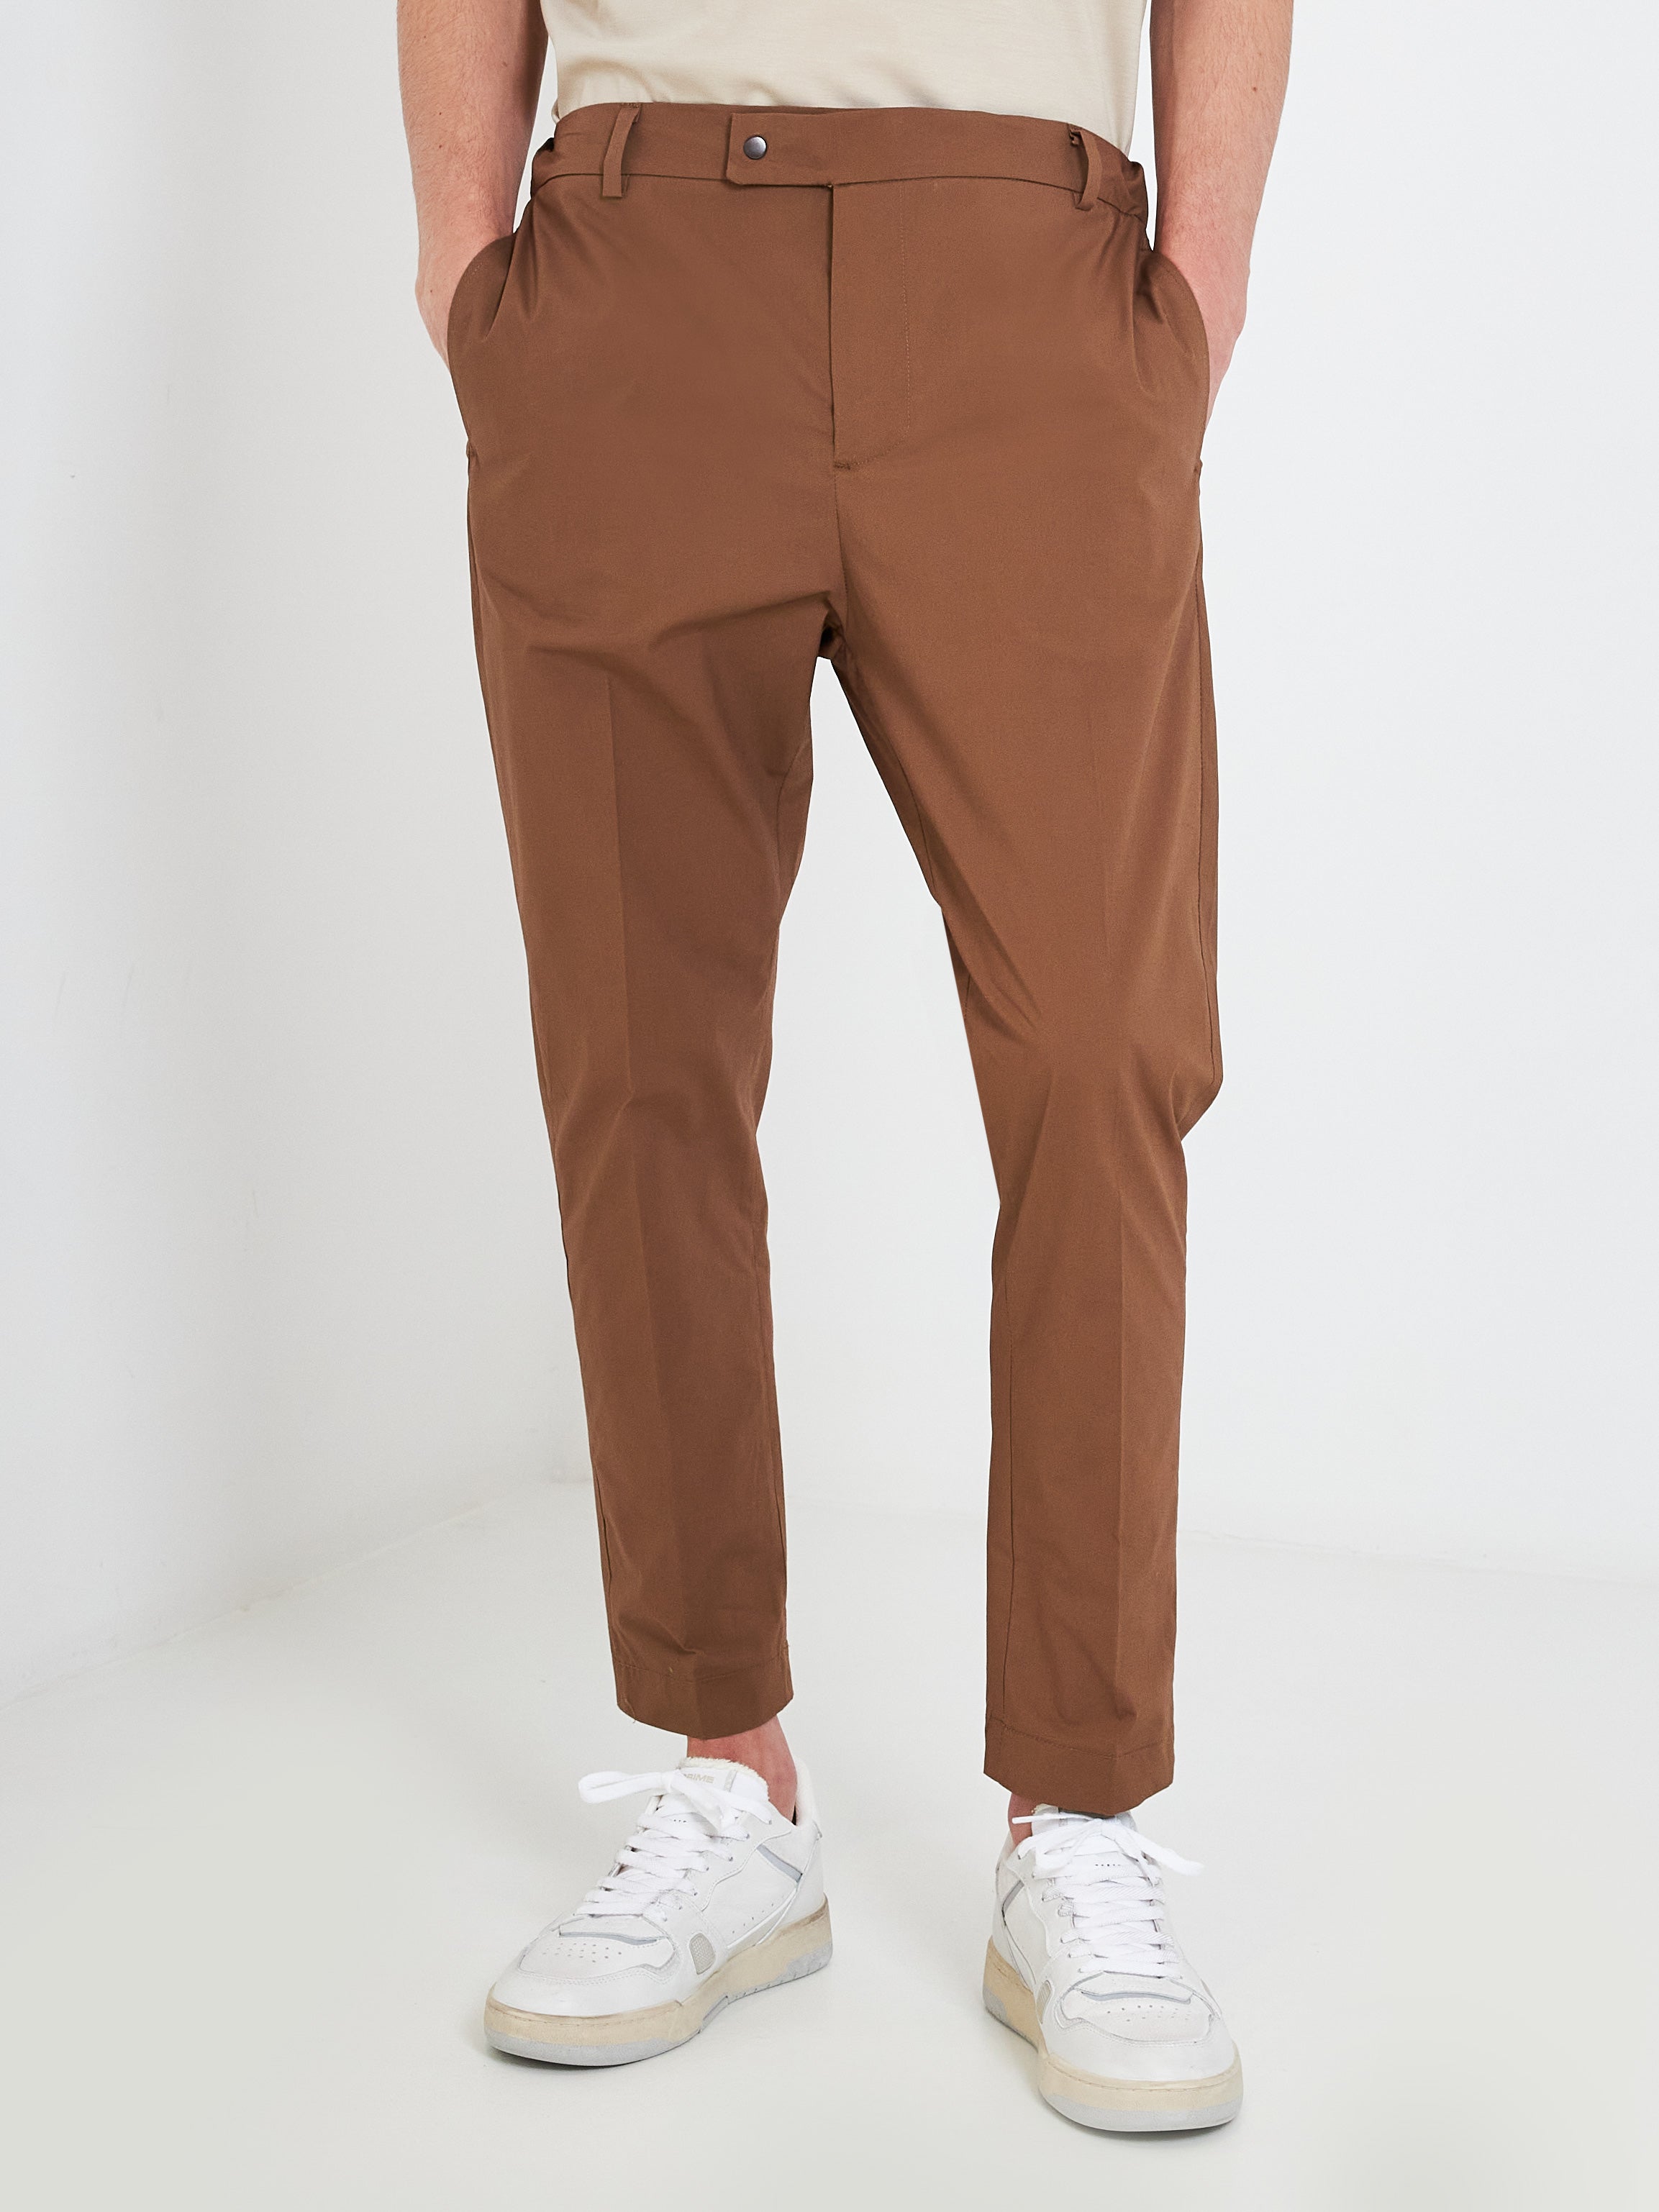 White Over Brown Pants